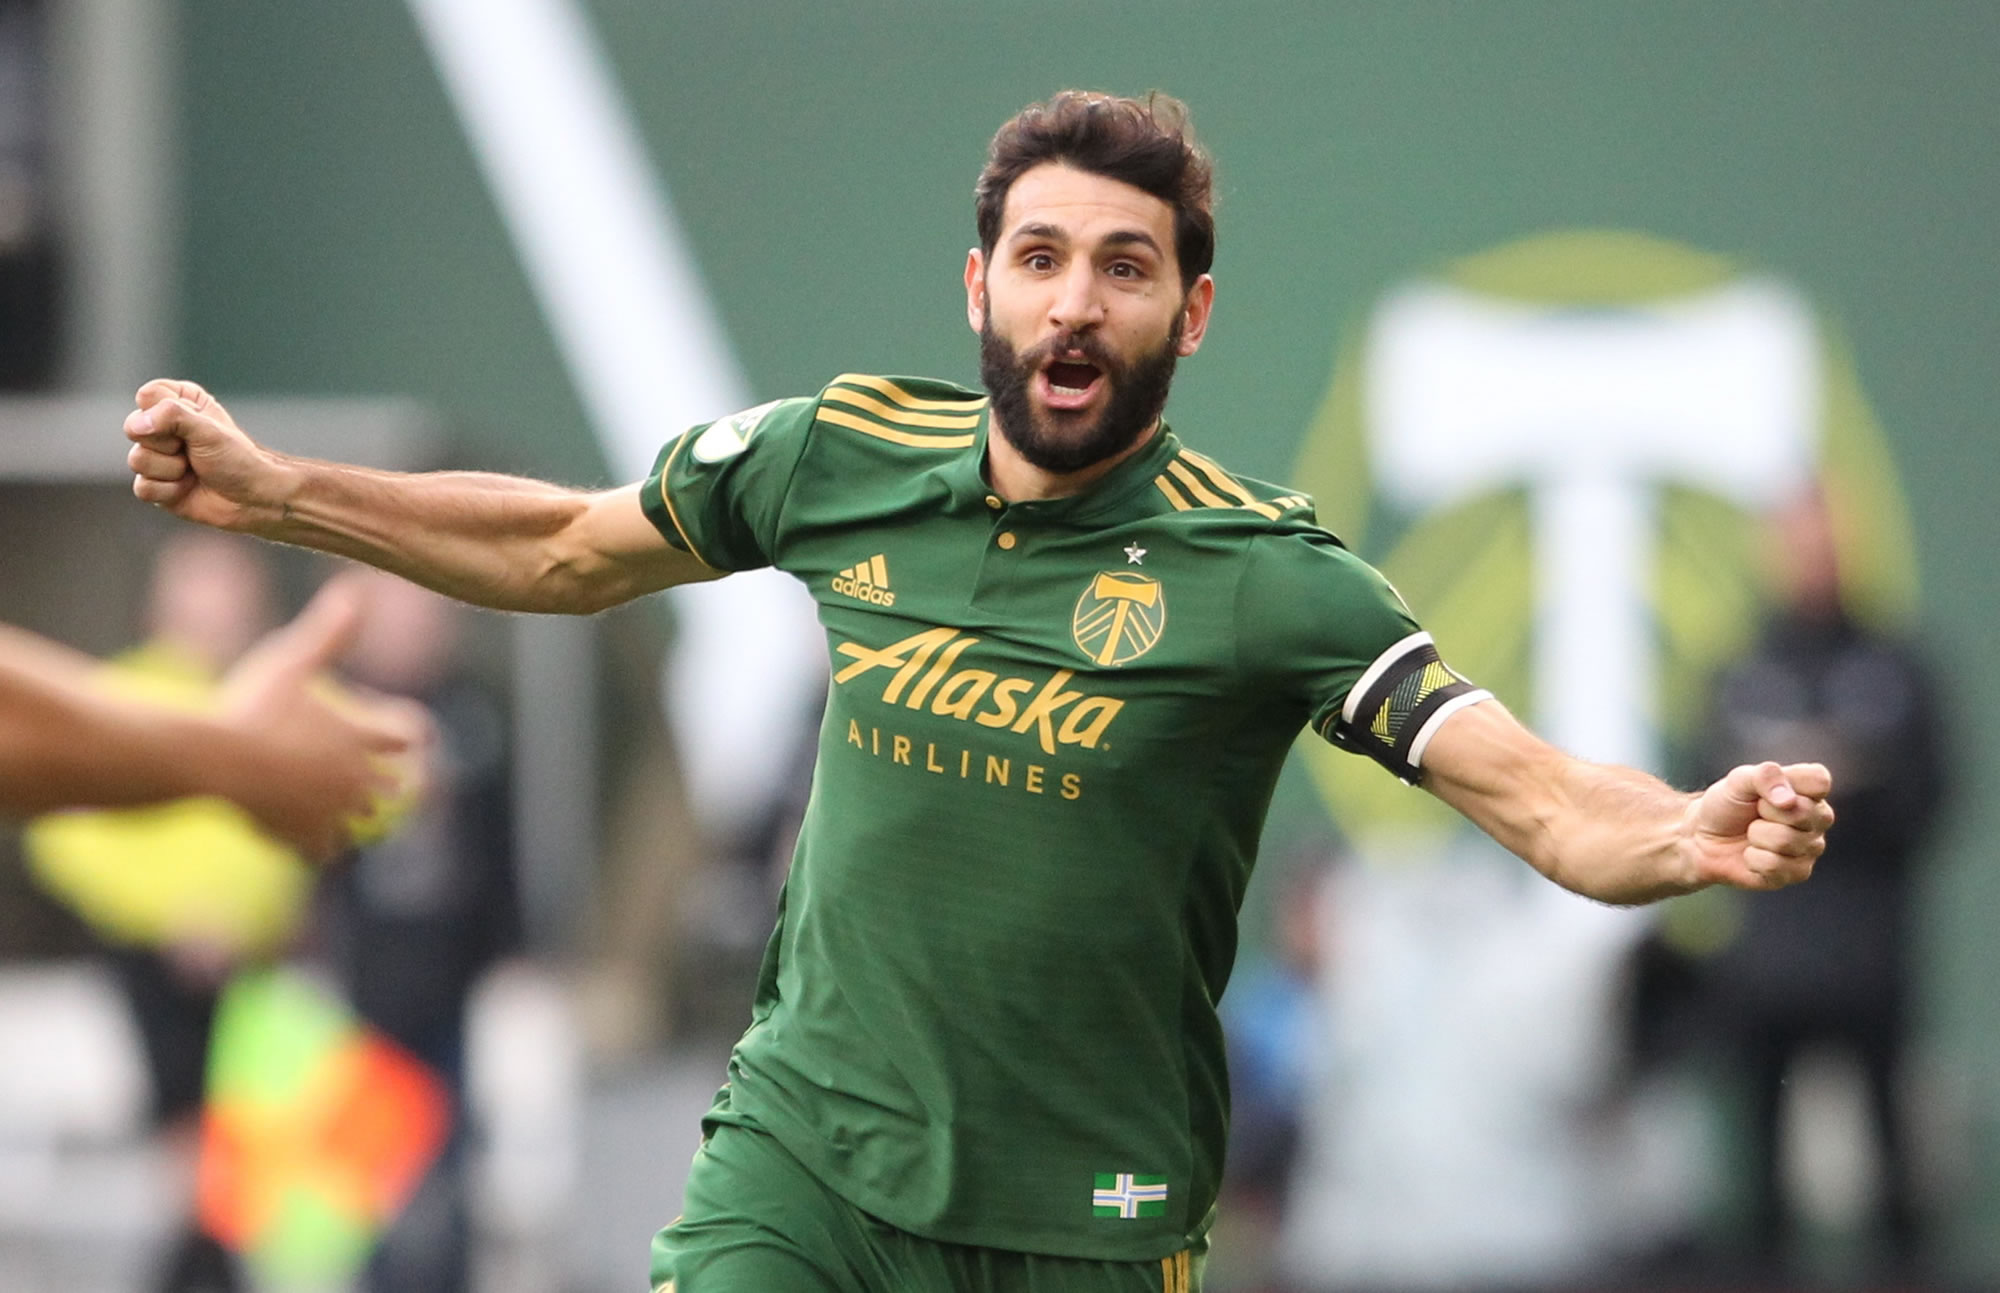 Diego Valeri has been named Major League Soccer's Most Valuable Player. The 31-year-old native of Argentina had 21 goals and 11 assists this season for Portland, which finished atop the Western Conference.